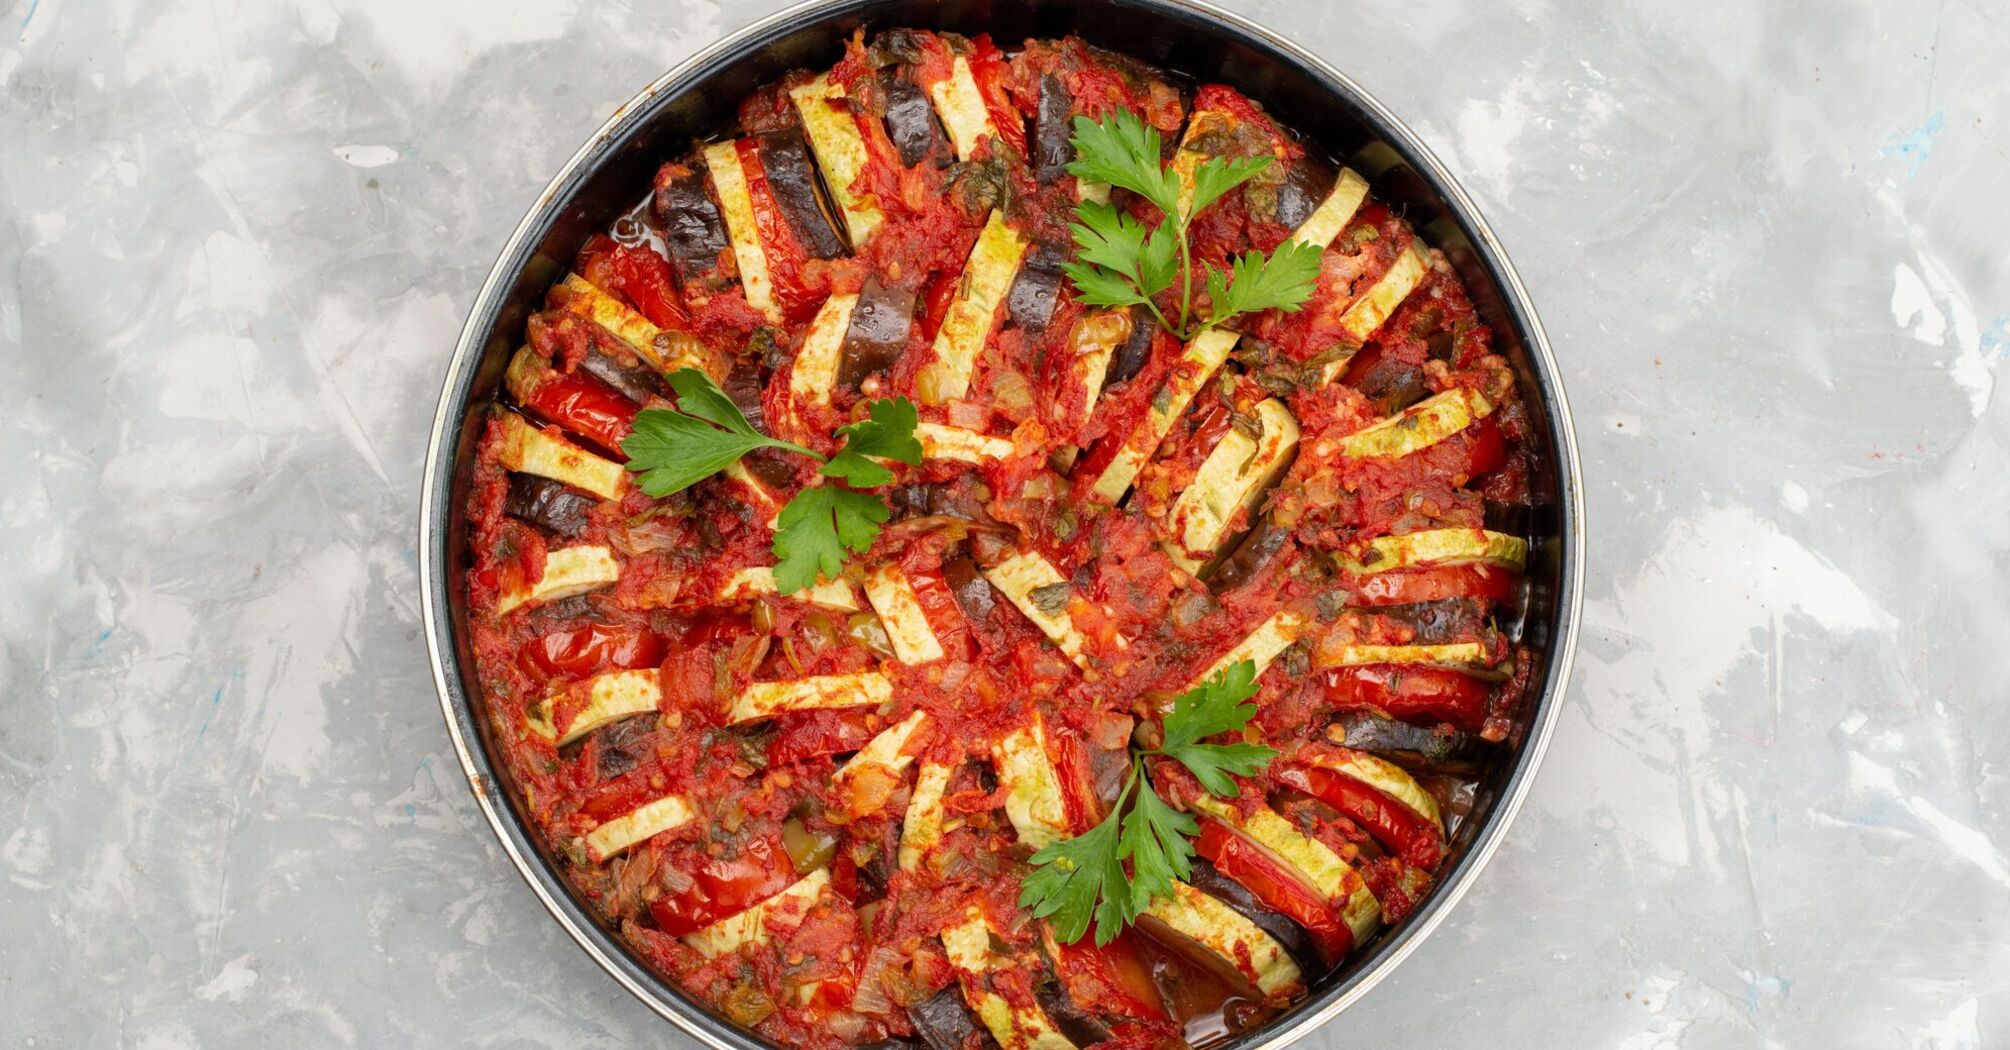 The most delicious vegetable ratatouille: how to make this bright rainbow dish